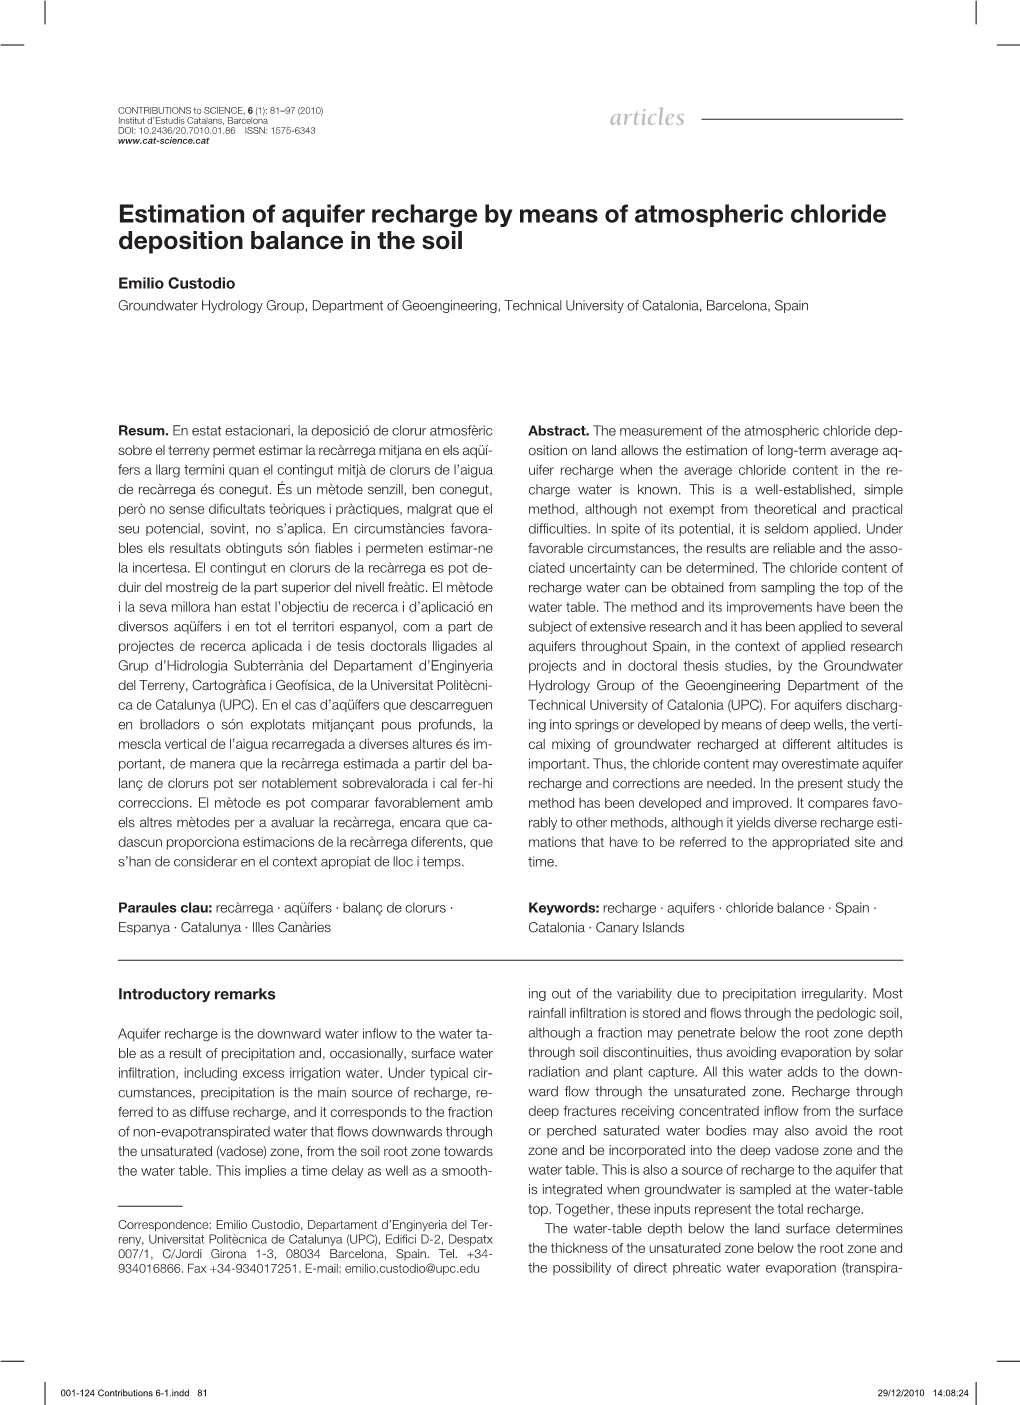 Articles Estimation of Aquifer Recharge by Means of Atmospheric Chloride